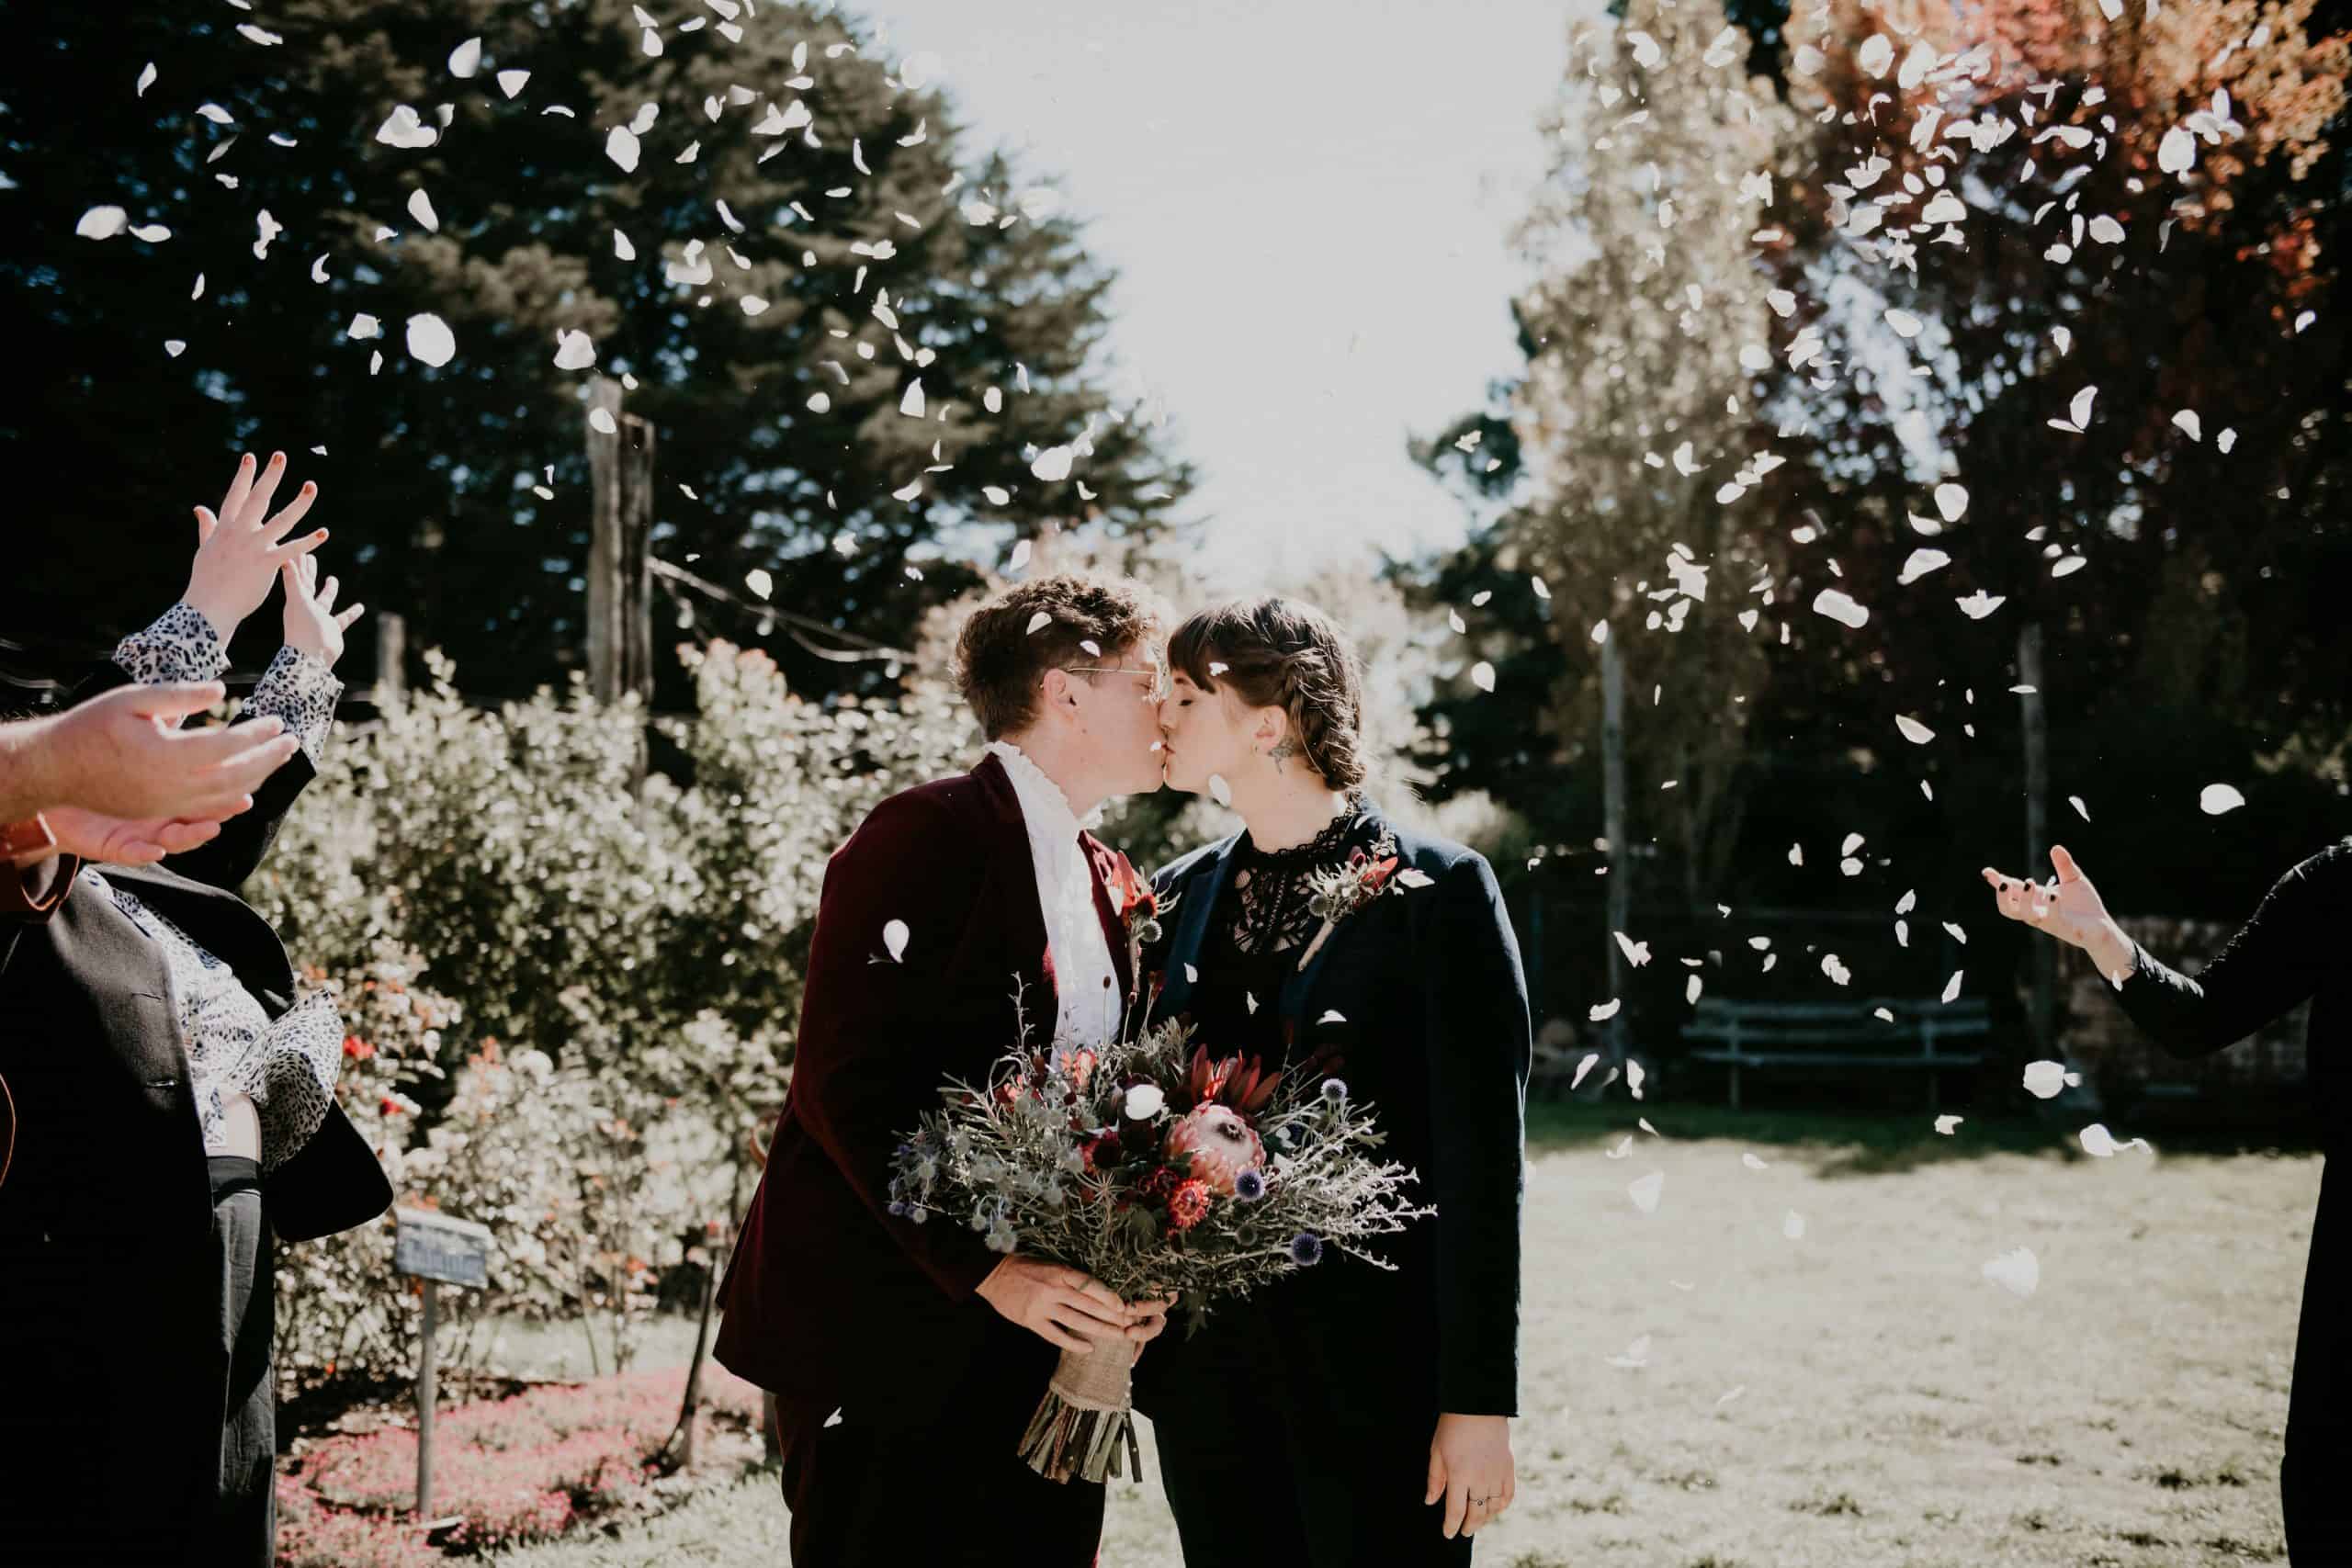 Couple kiss under rose petals thrown in the air. Let's Elope Melbourne professional elopement packages for a small intimate wedding. Beautiful ceremony and photography elopement packages